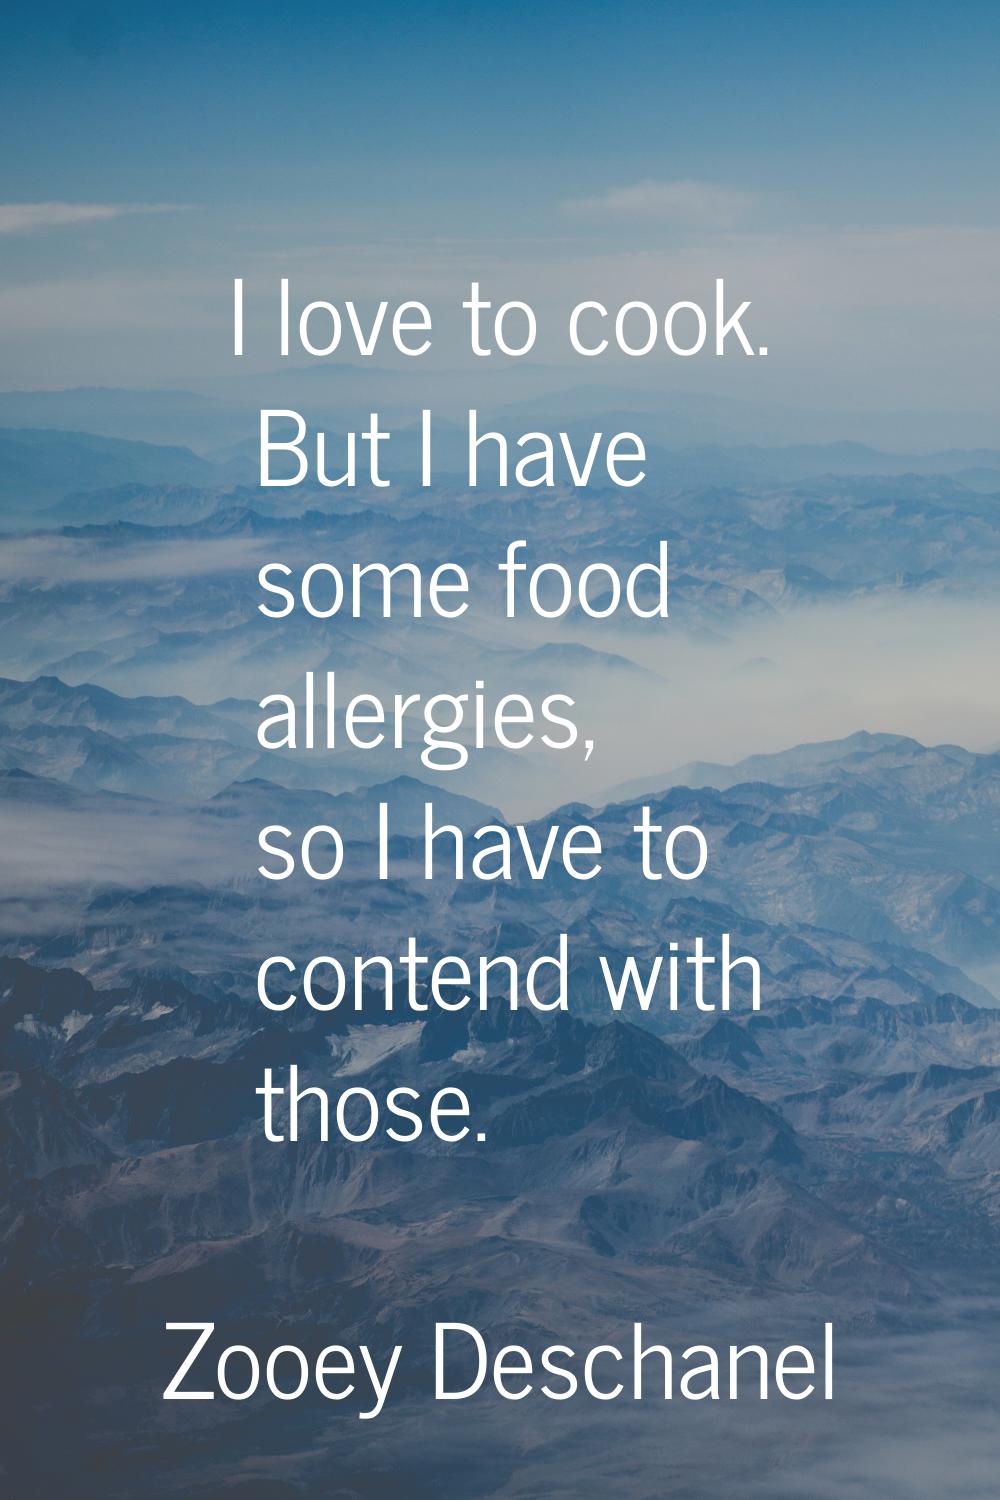 I love to cook. But I have some food allergies, so I have to contend with those.